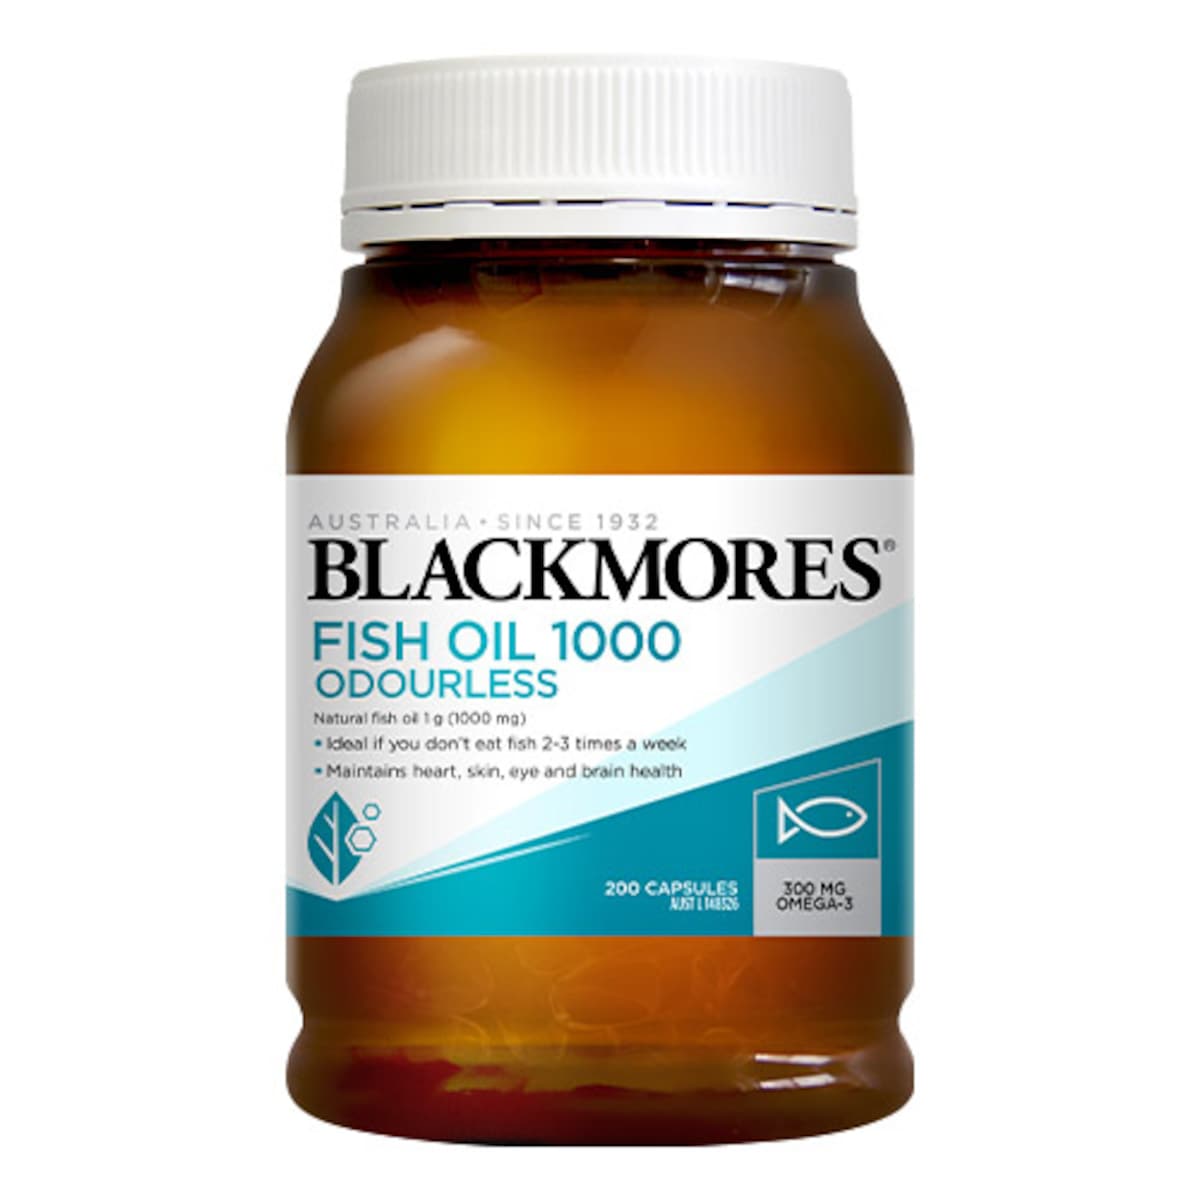 Blackmores Fish Oil Odourless 1000Mg 200 Capsules